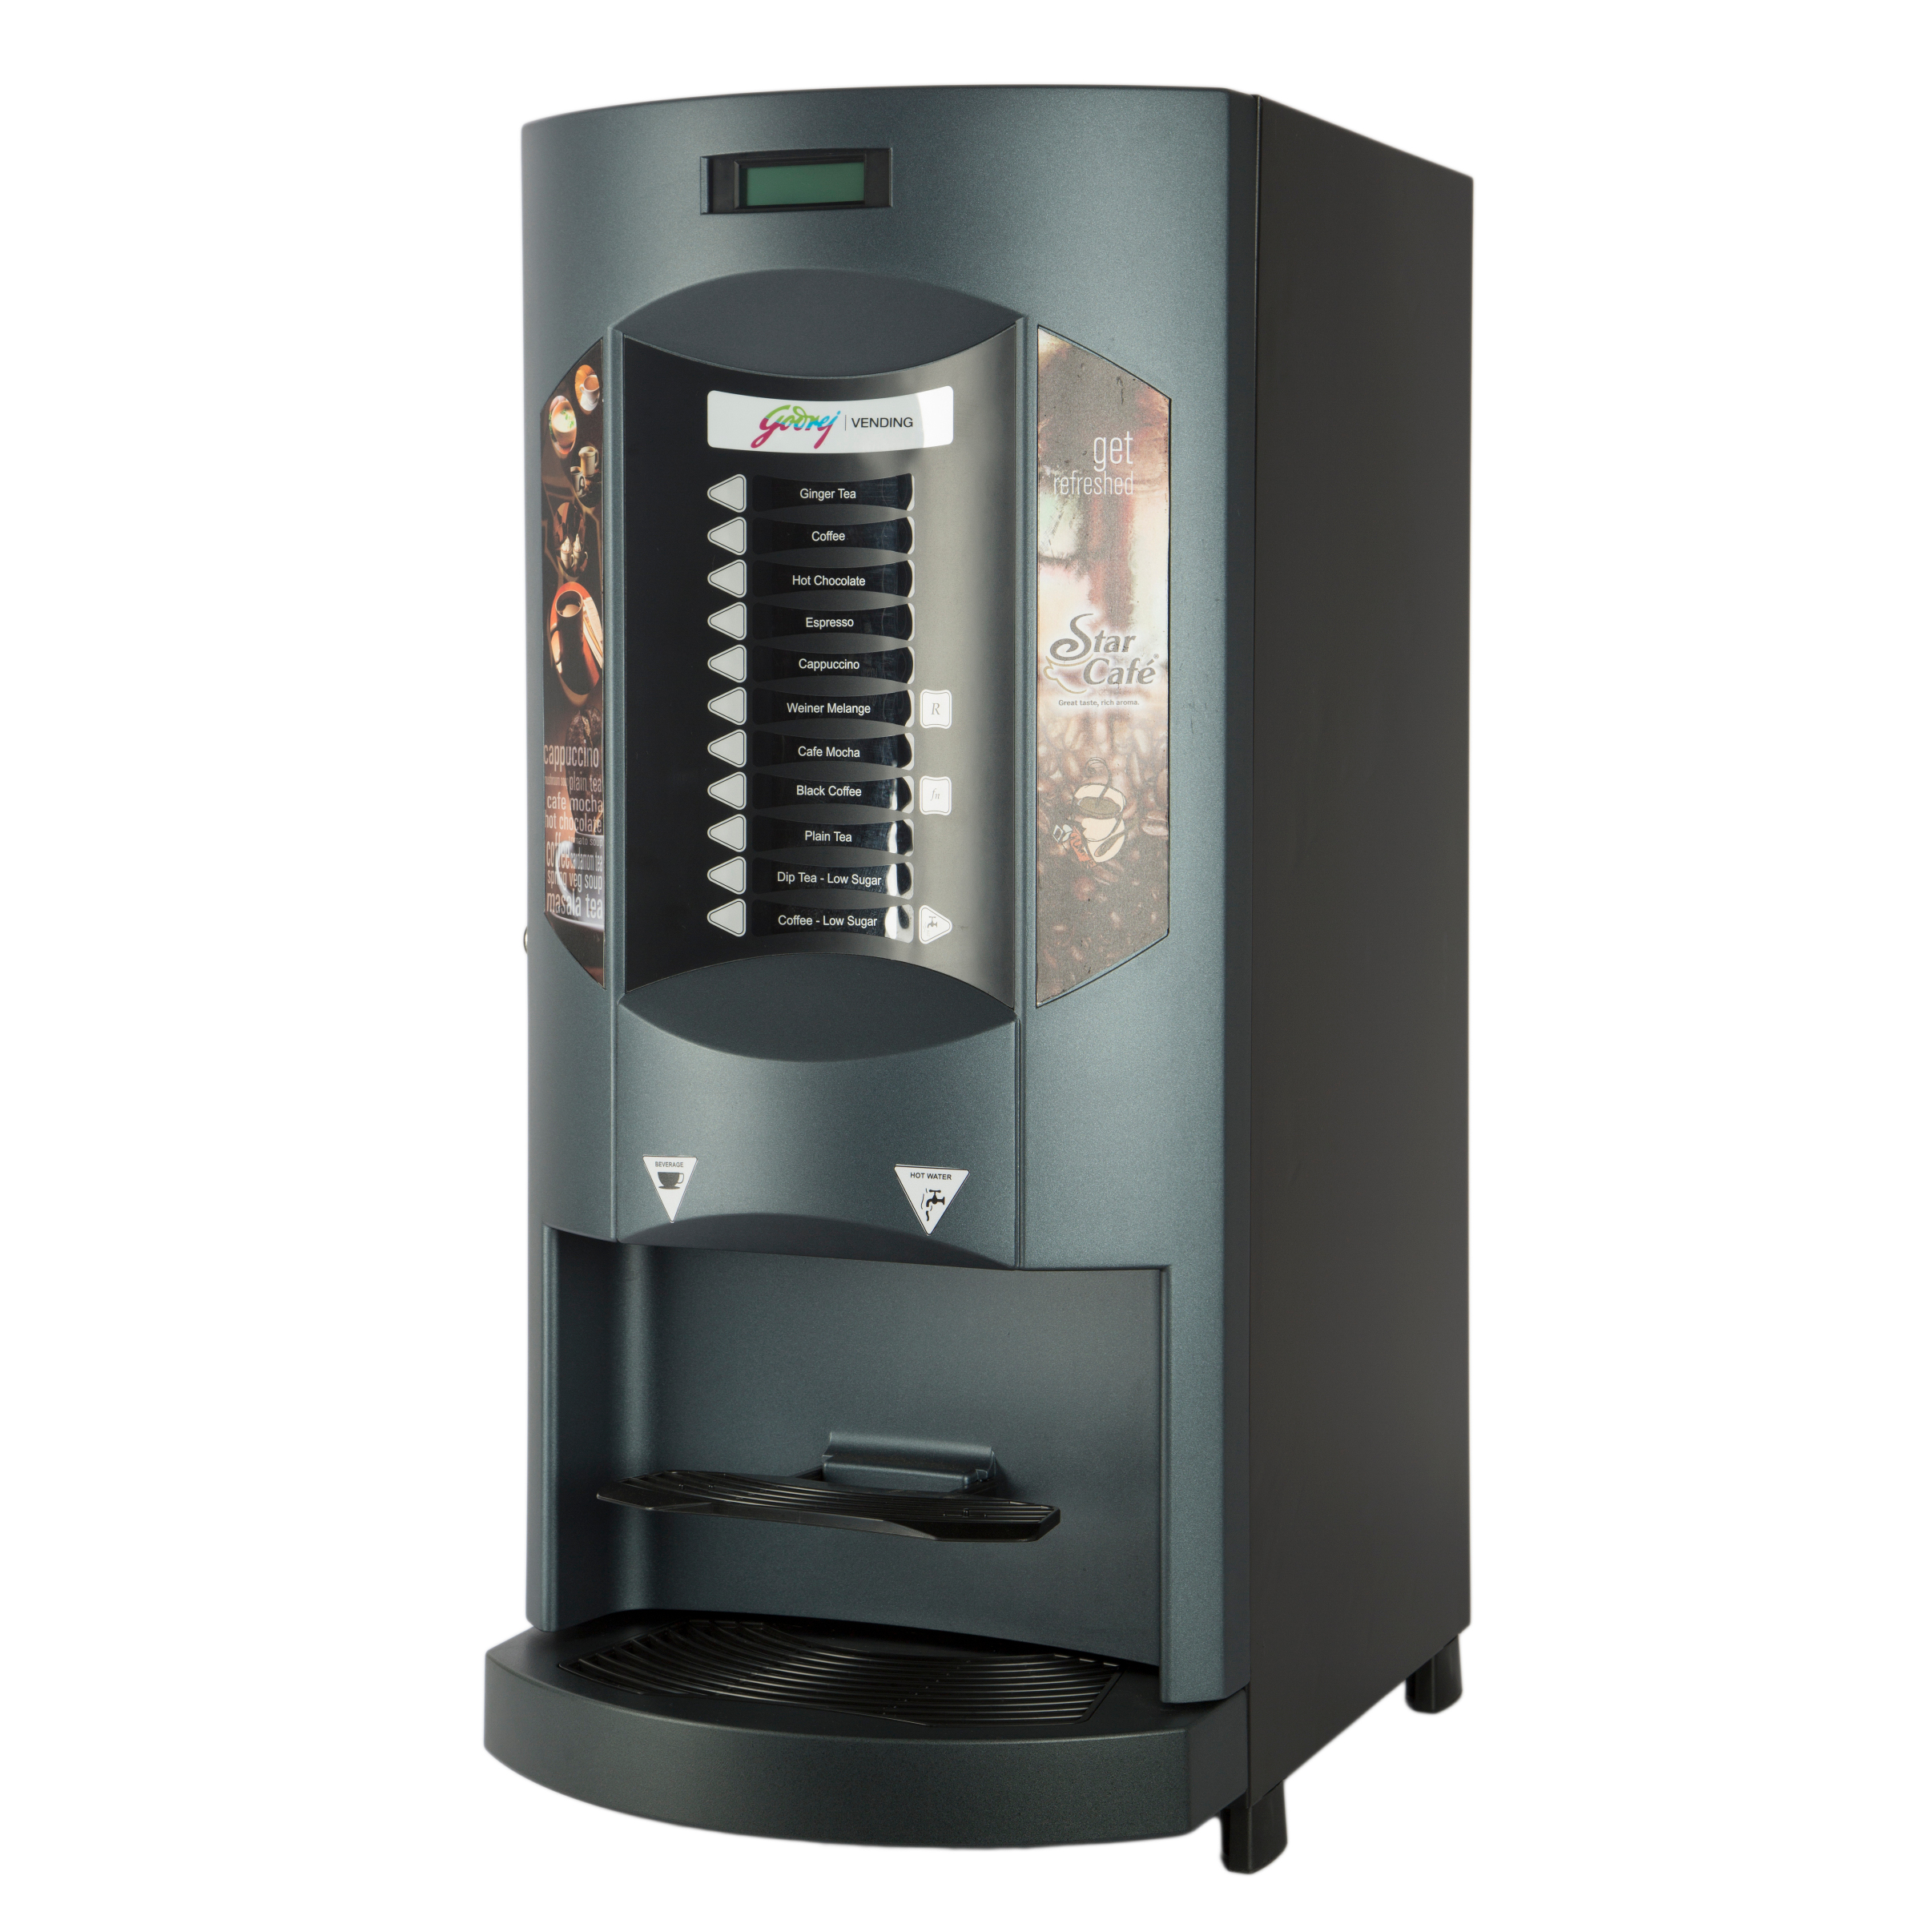 The Complete Guide to Coffee Vending Machine Prices